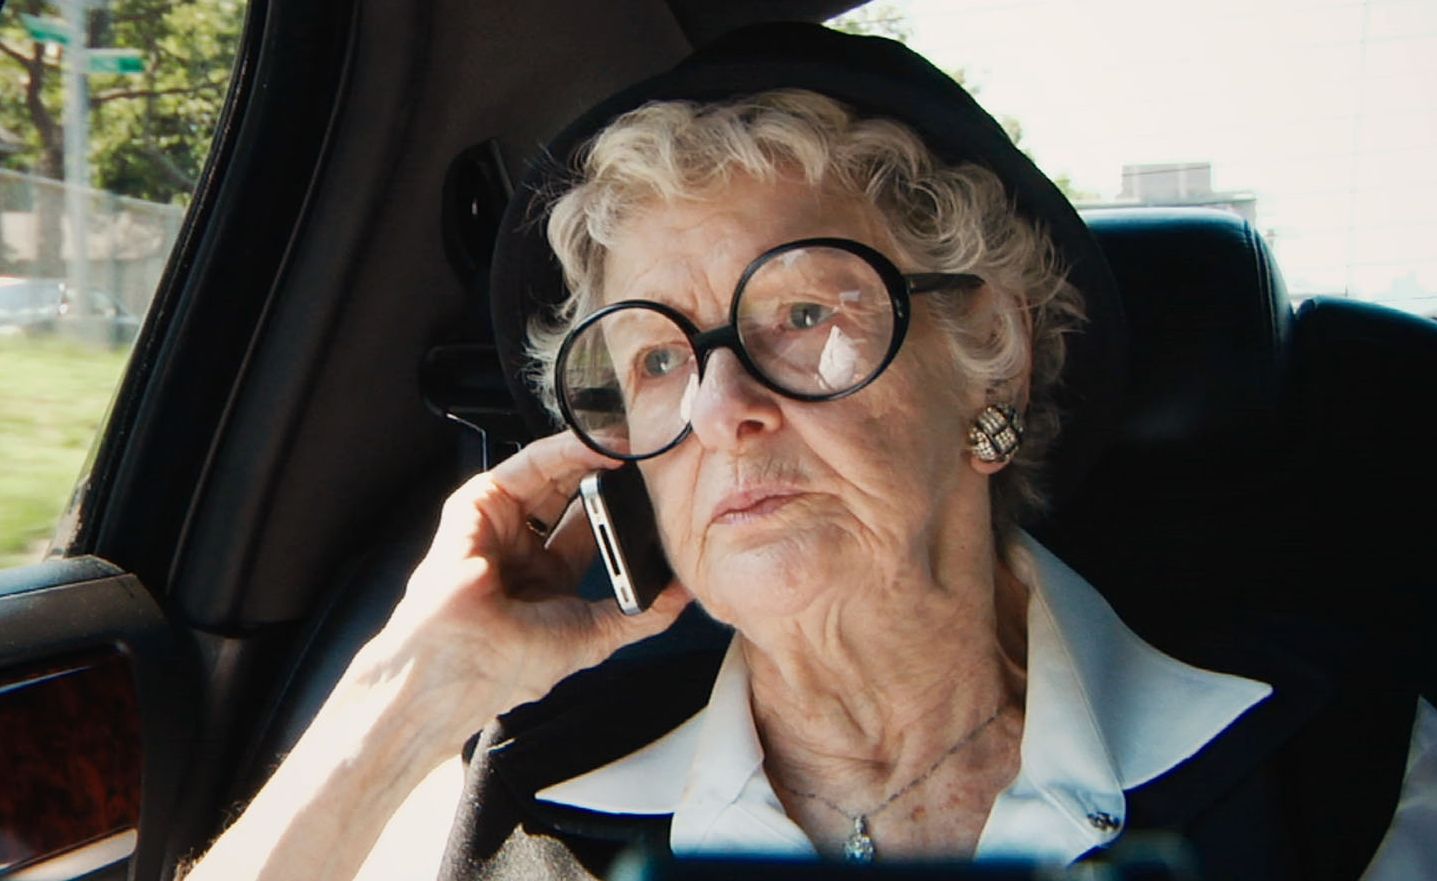 Elaine Stritch on the phone with her big glasses